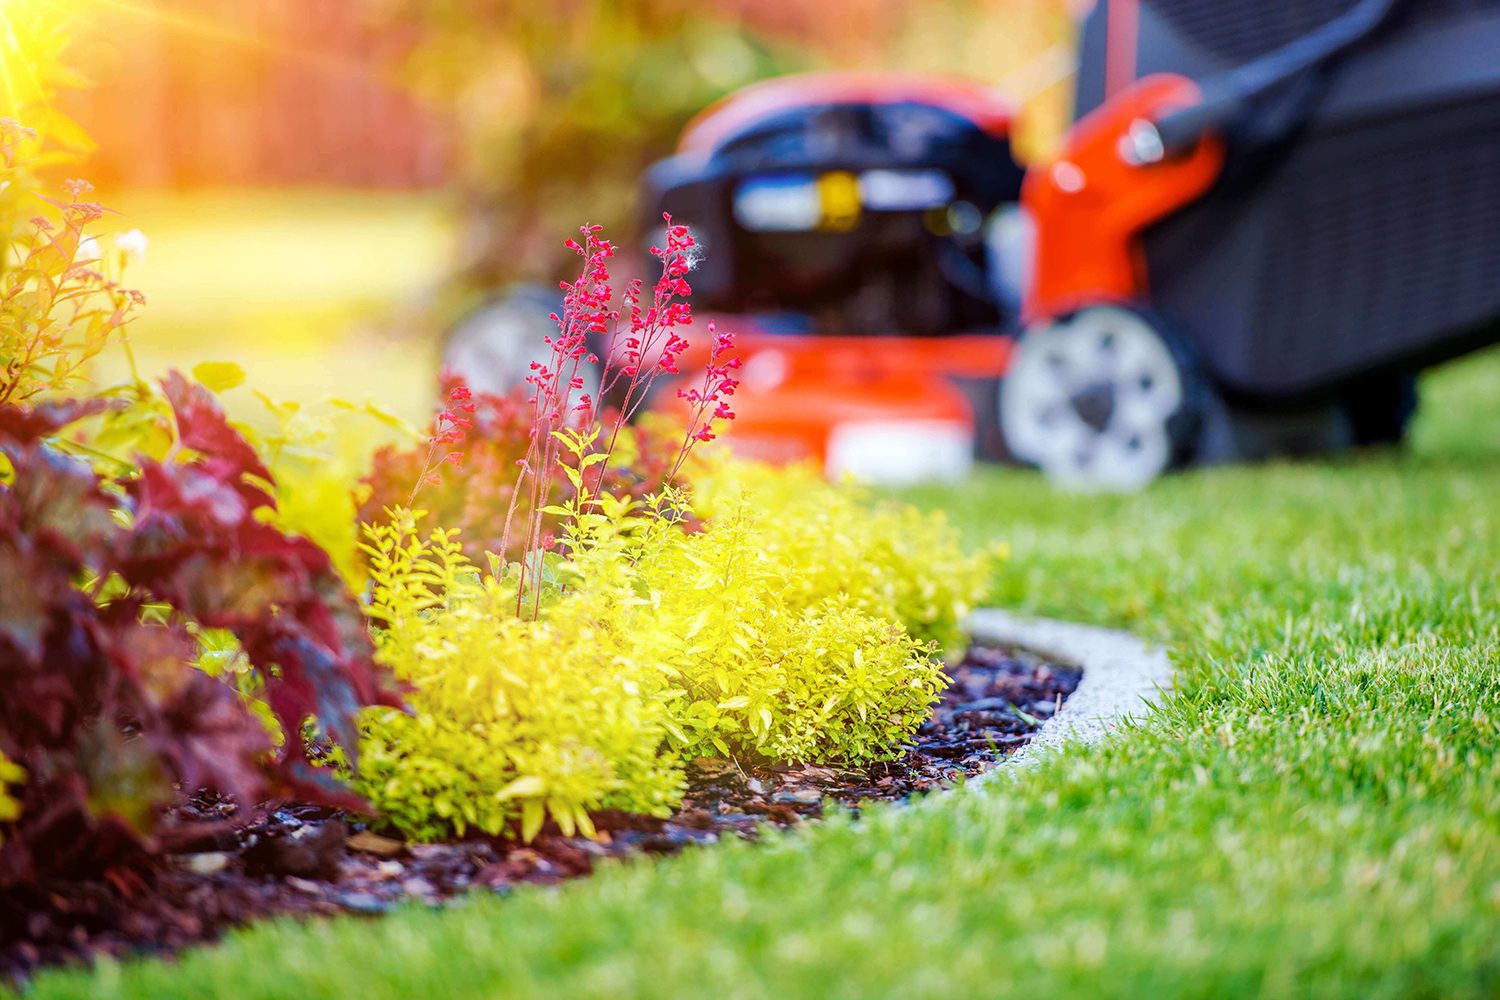 Landscaping Services Maryborough - Lawn Mowing, Garden Care